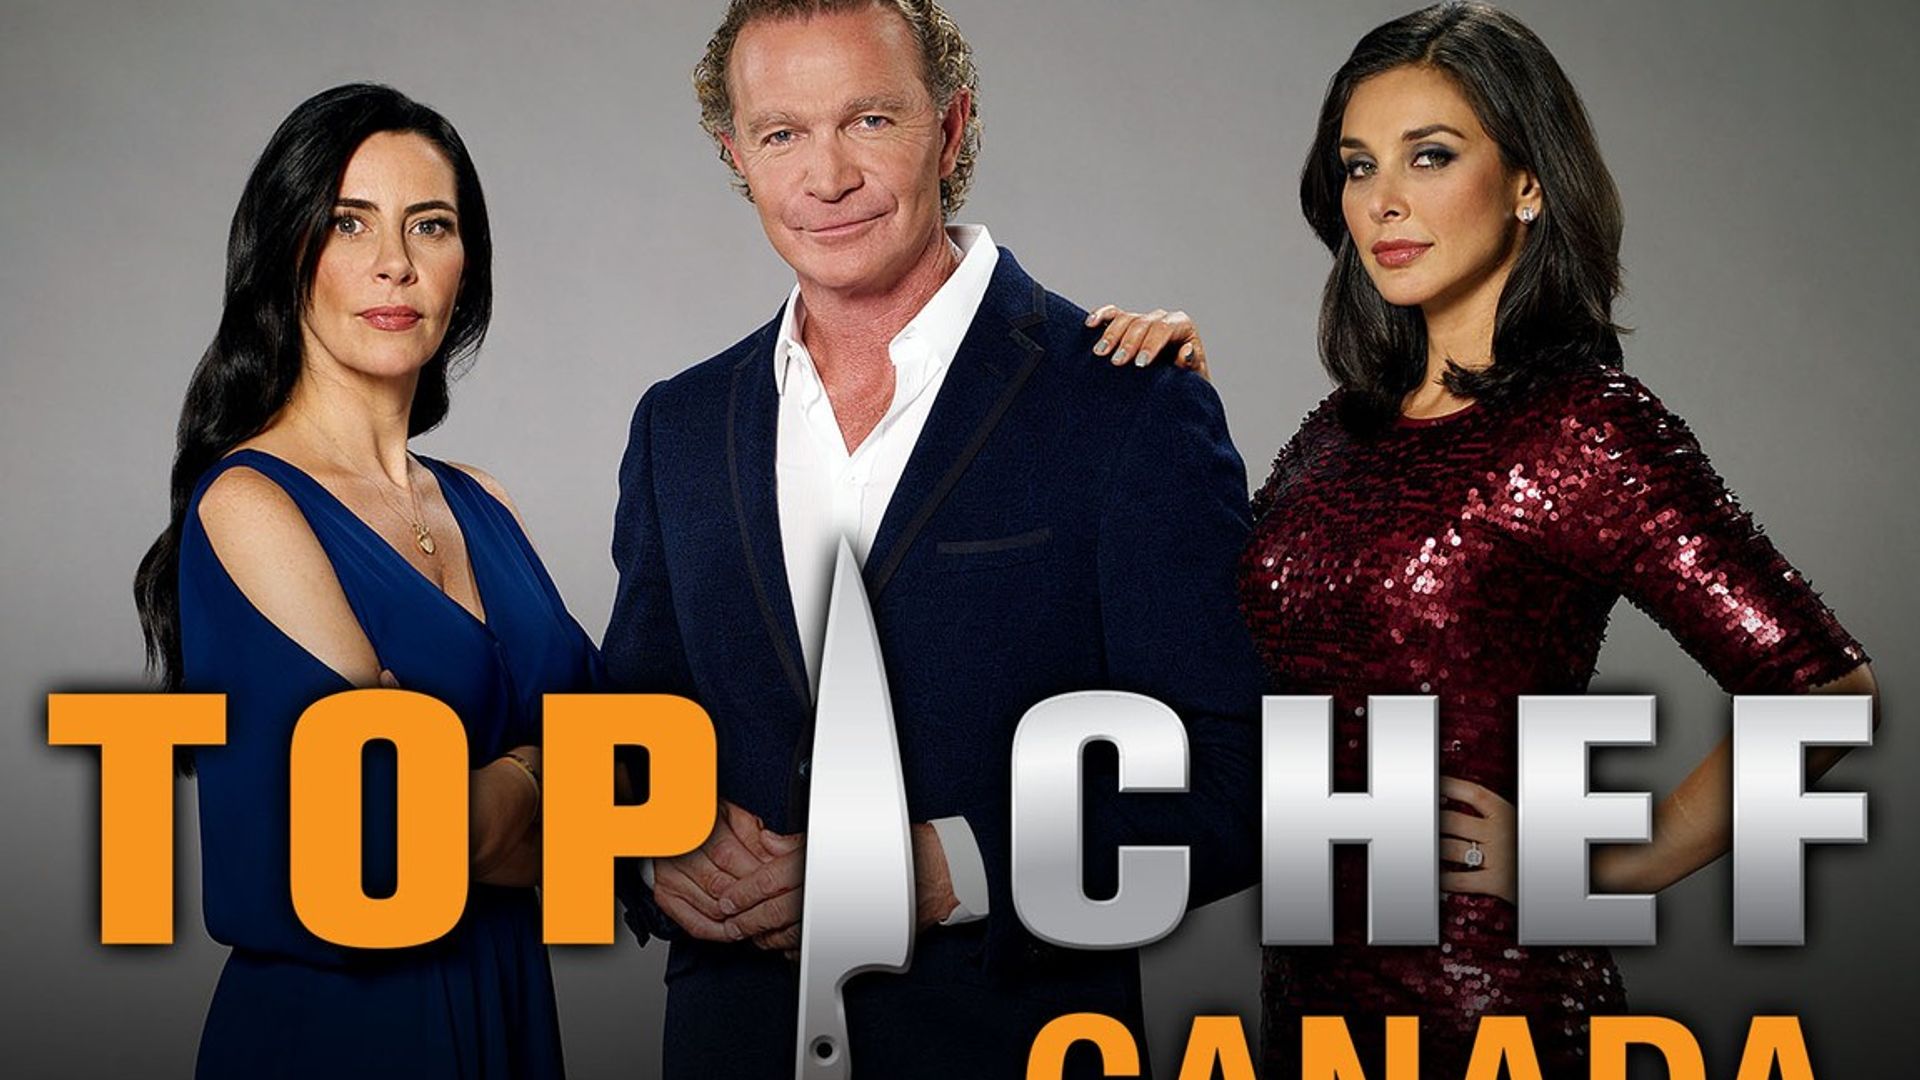 Top Chef Canada background